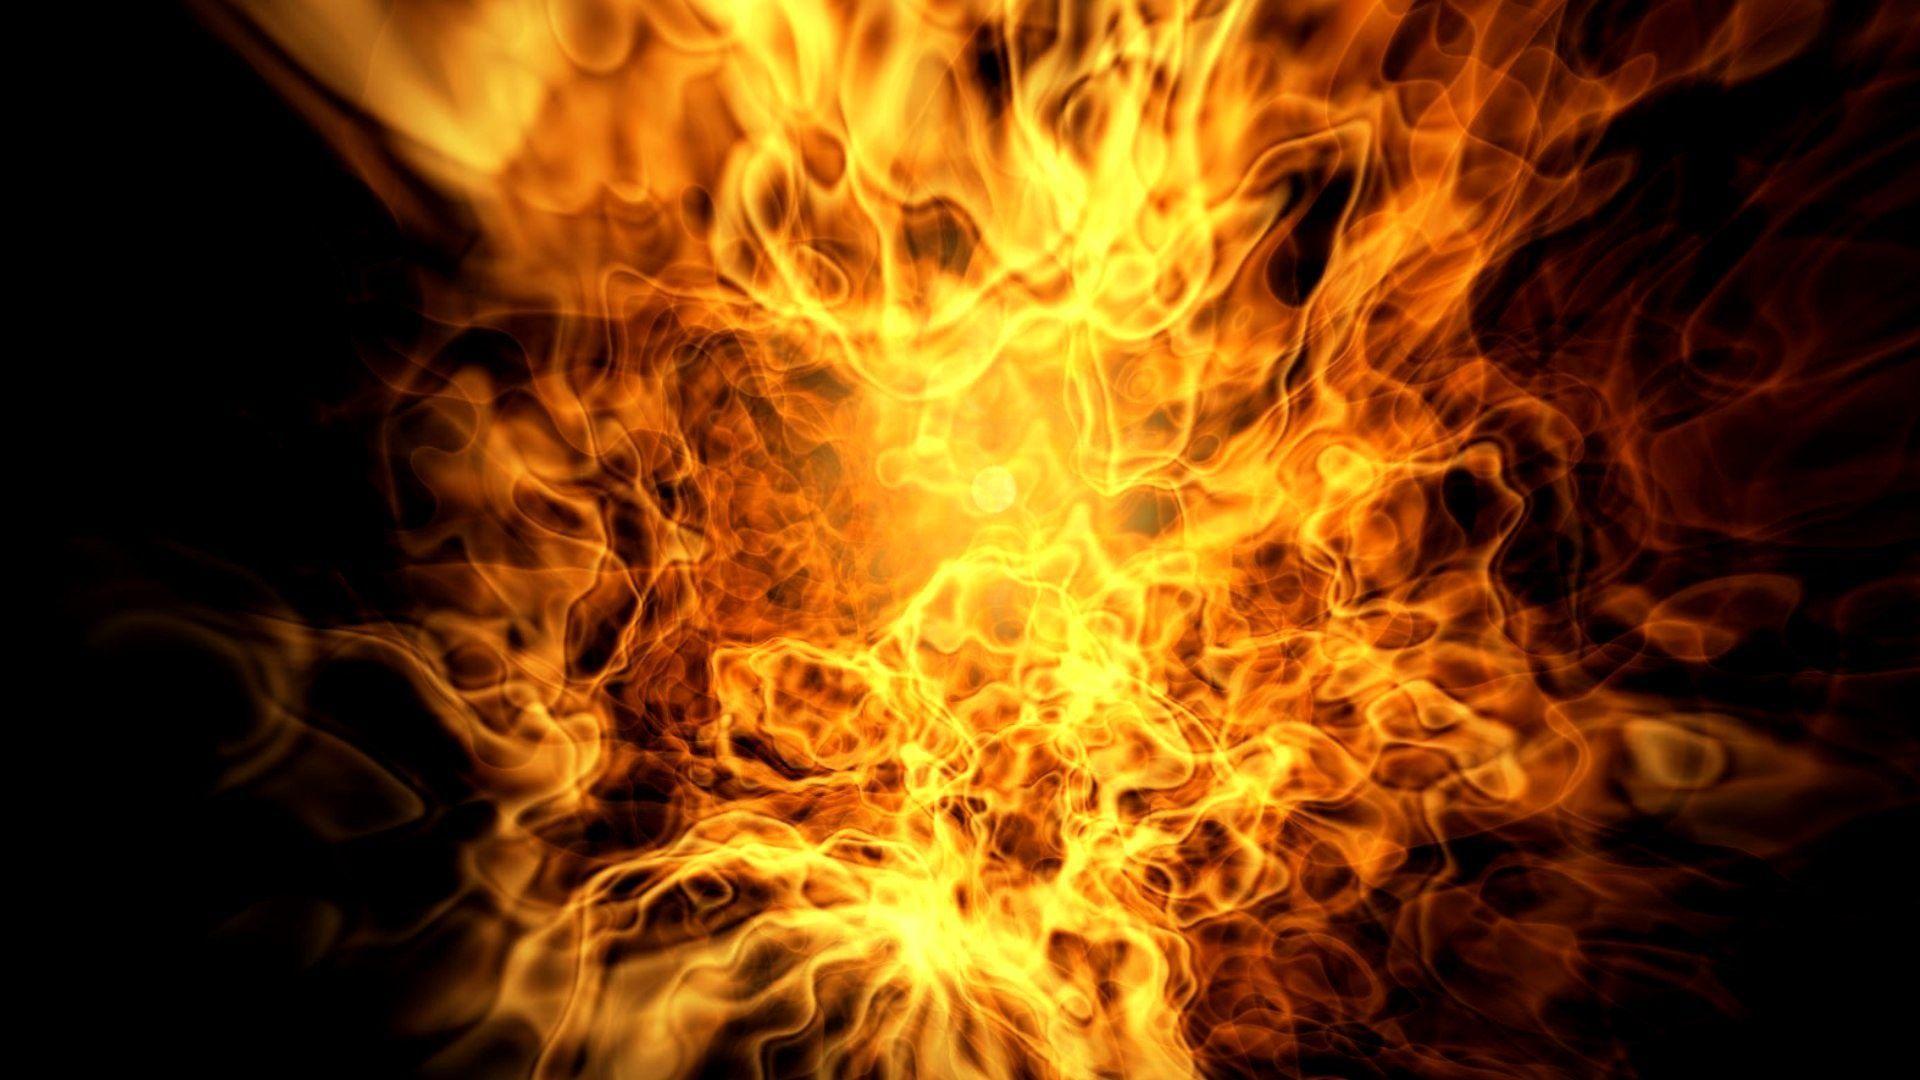 Fire Wallpaper, Background, Image, Picture. Design Trends